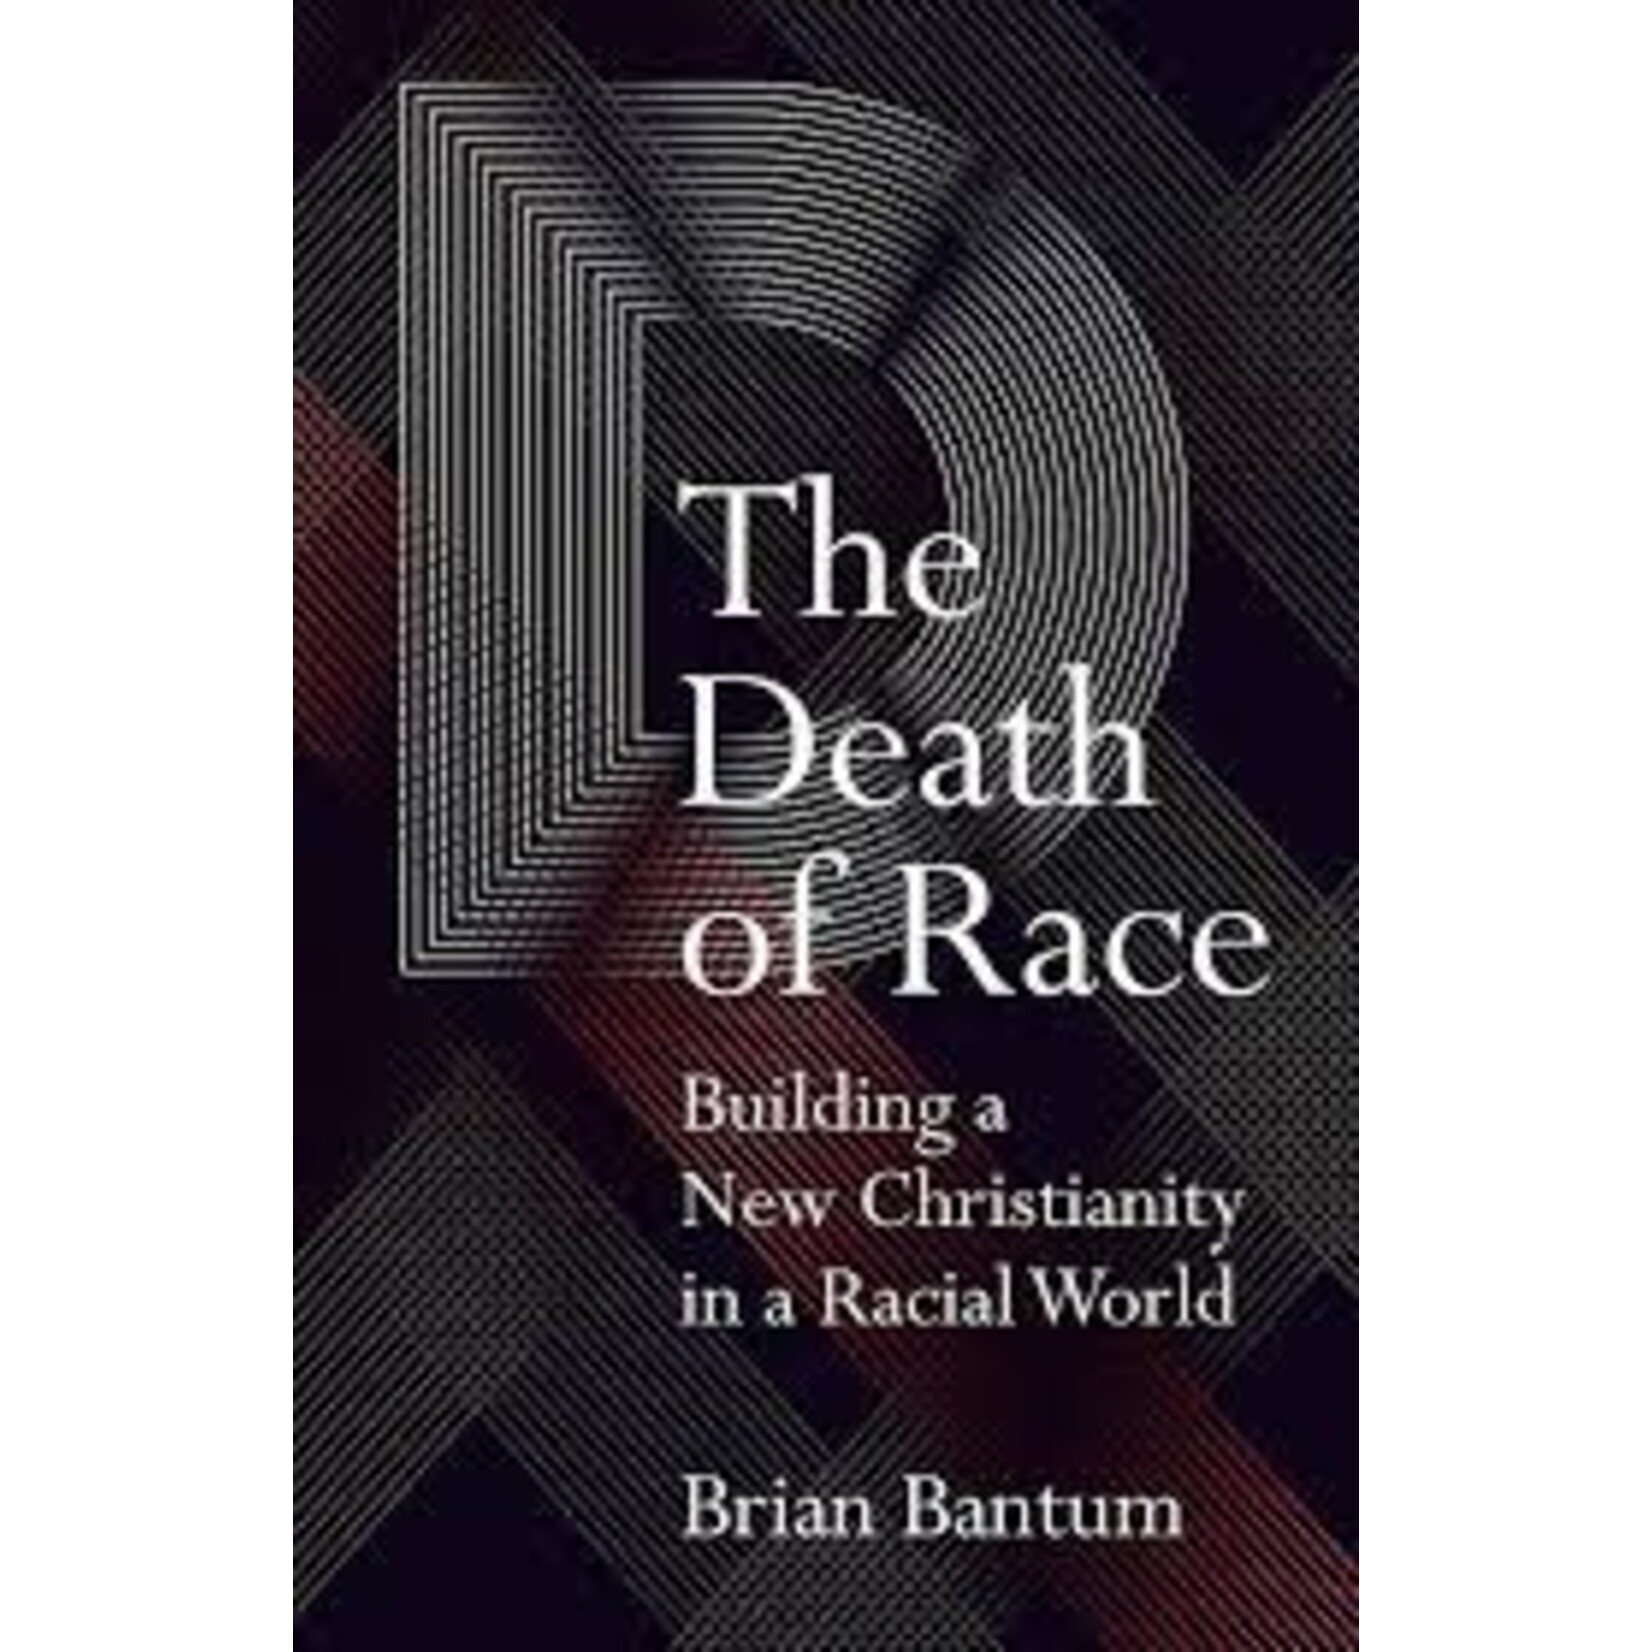 The Death of Race